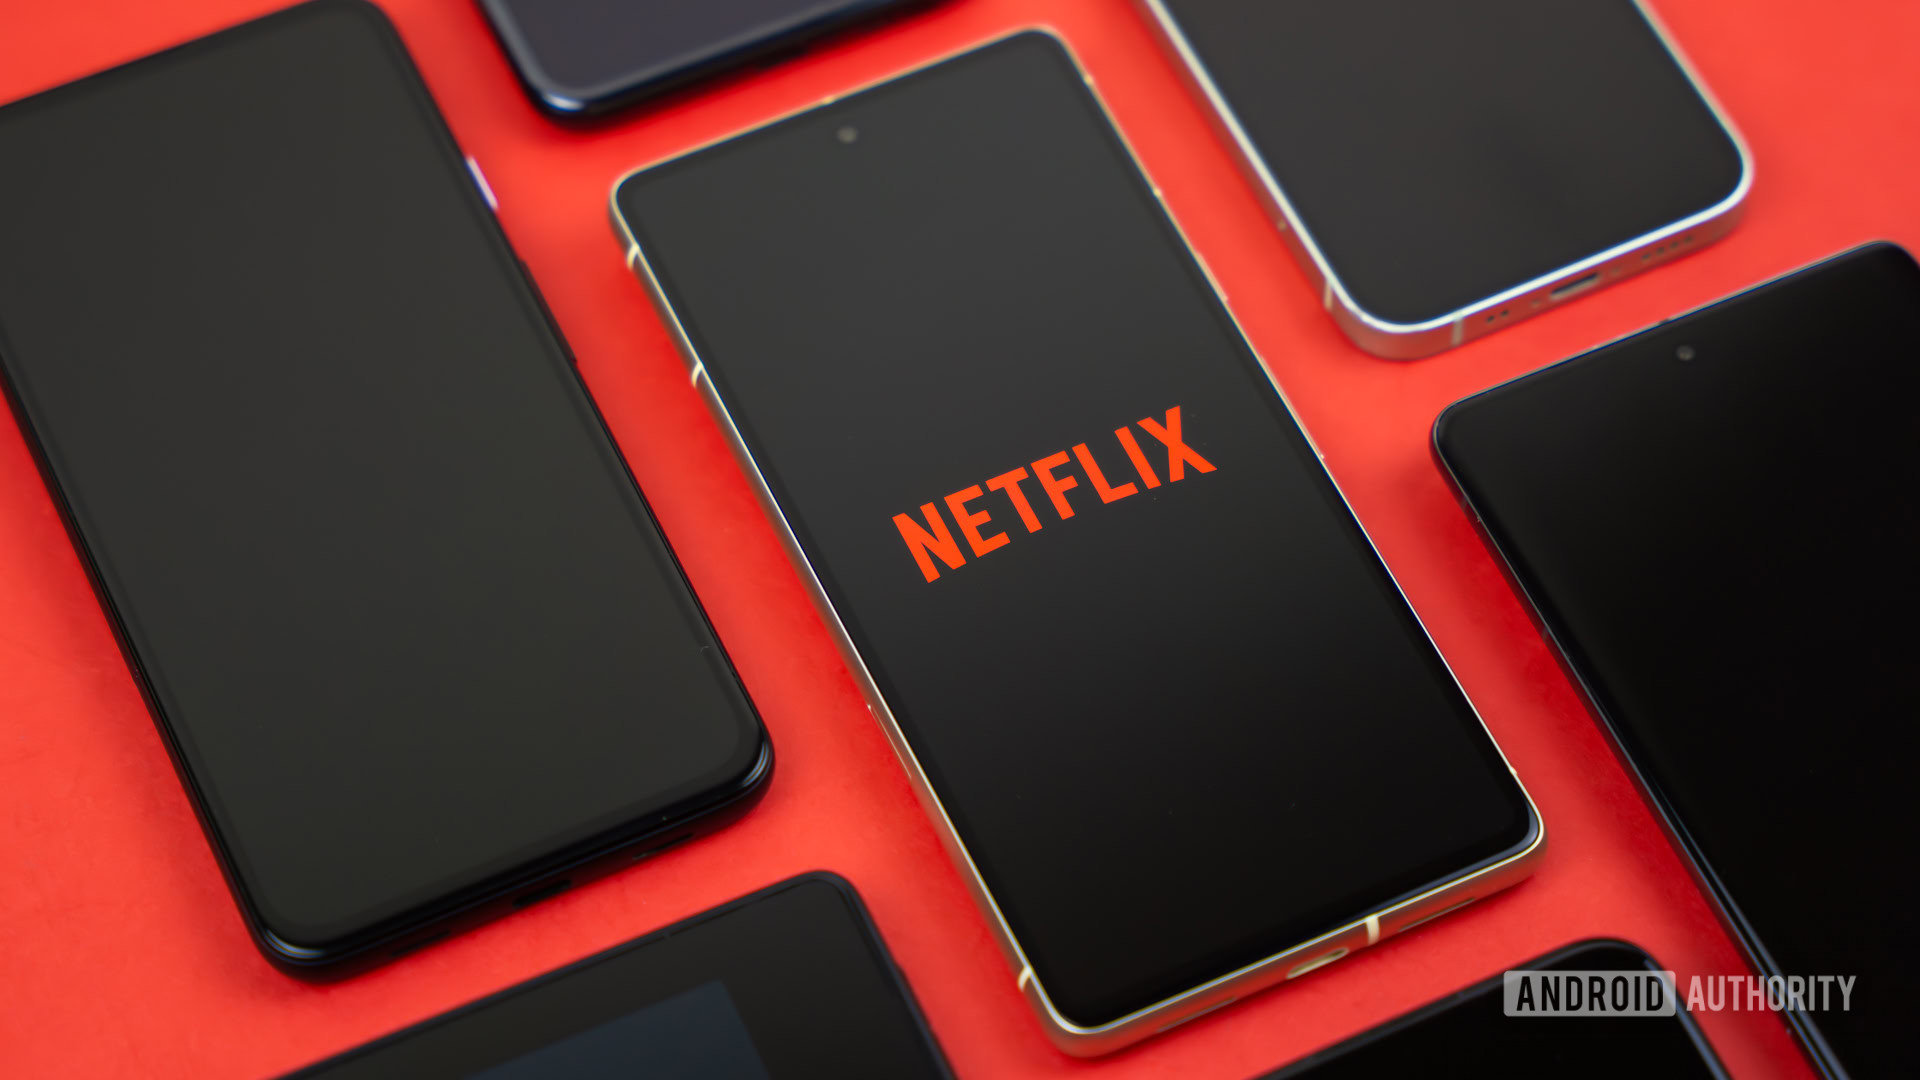 Netflix logo on smartphone, next to other devices stock photo (1)